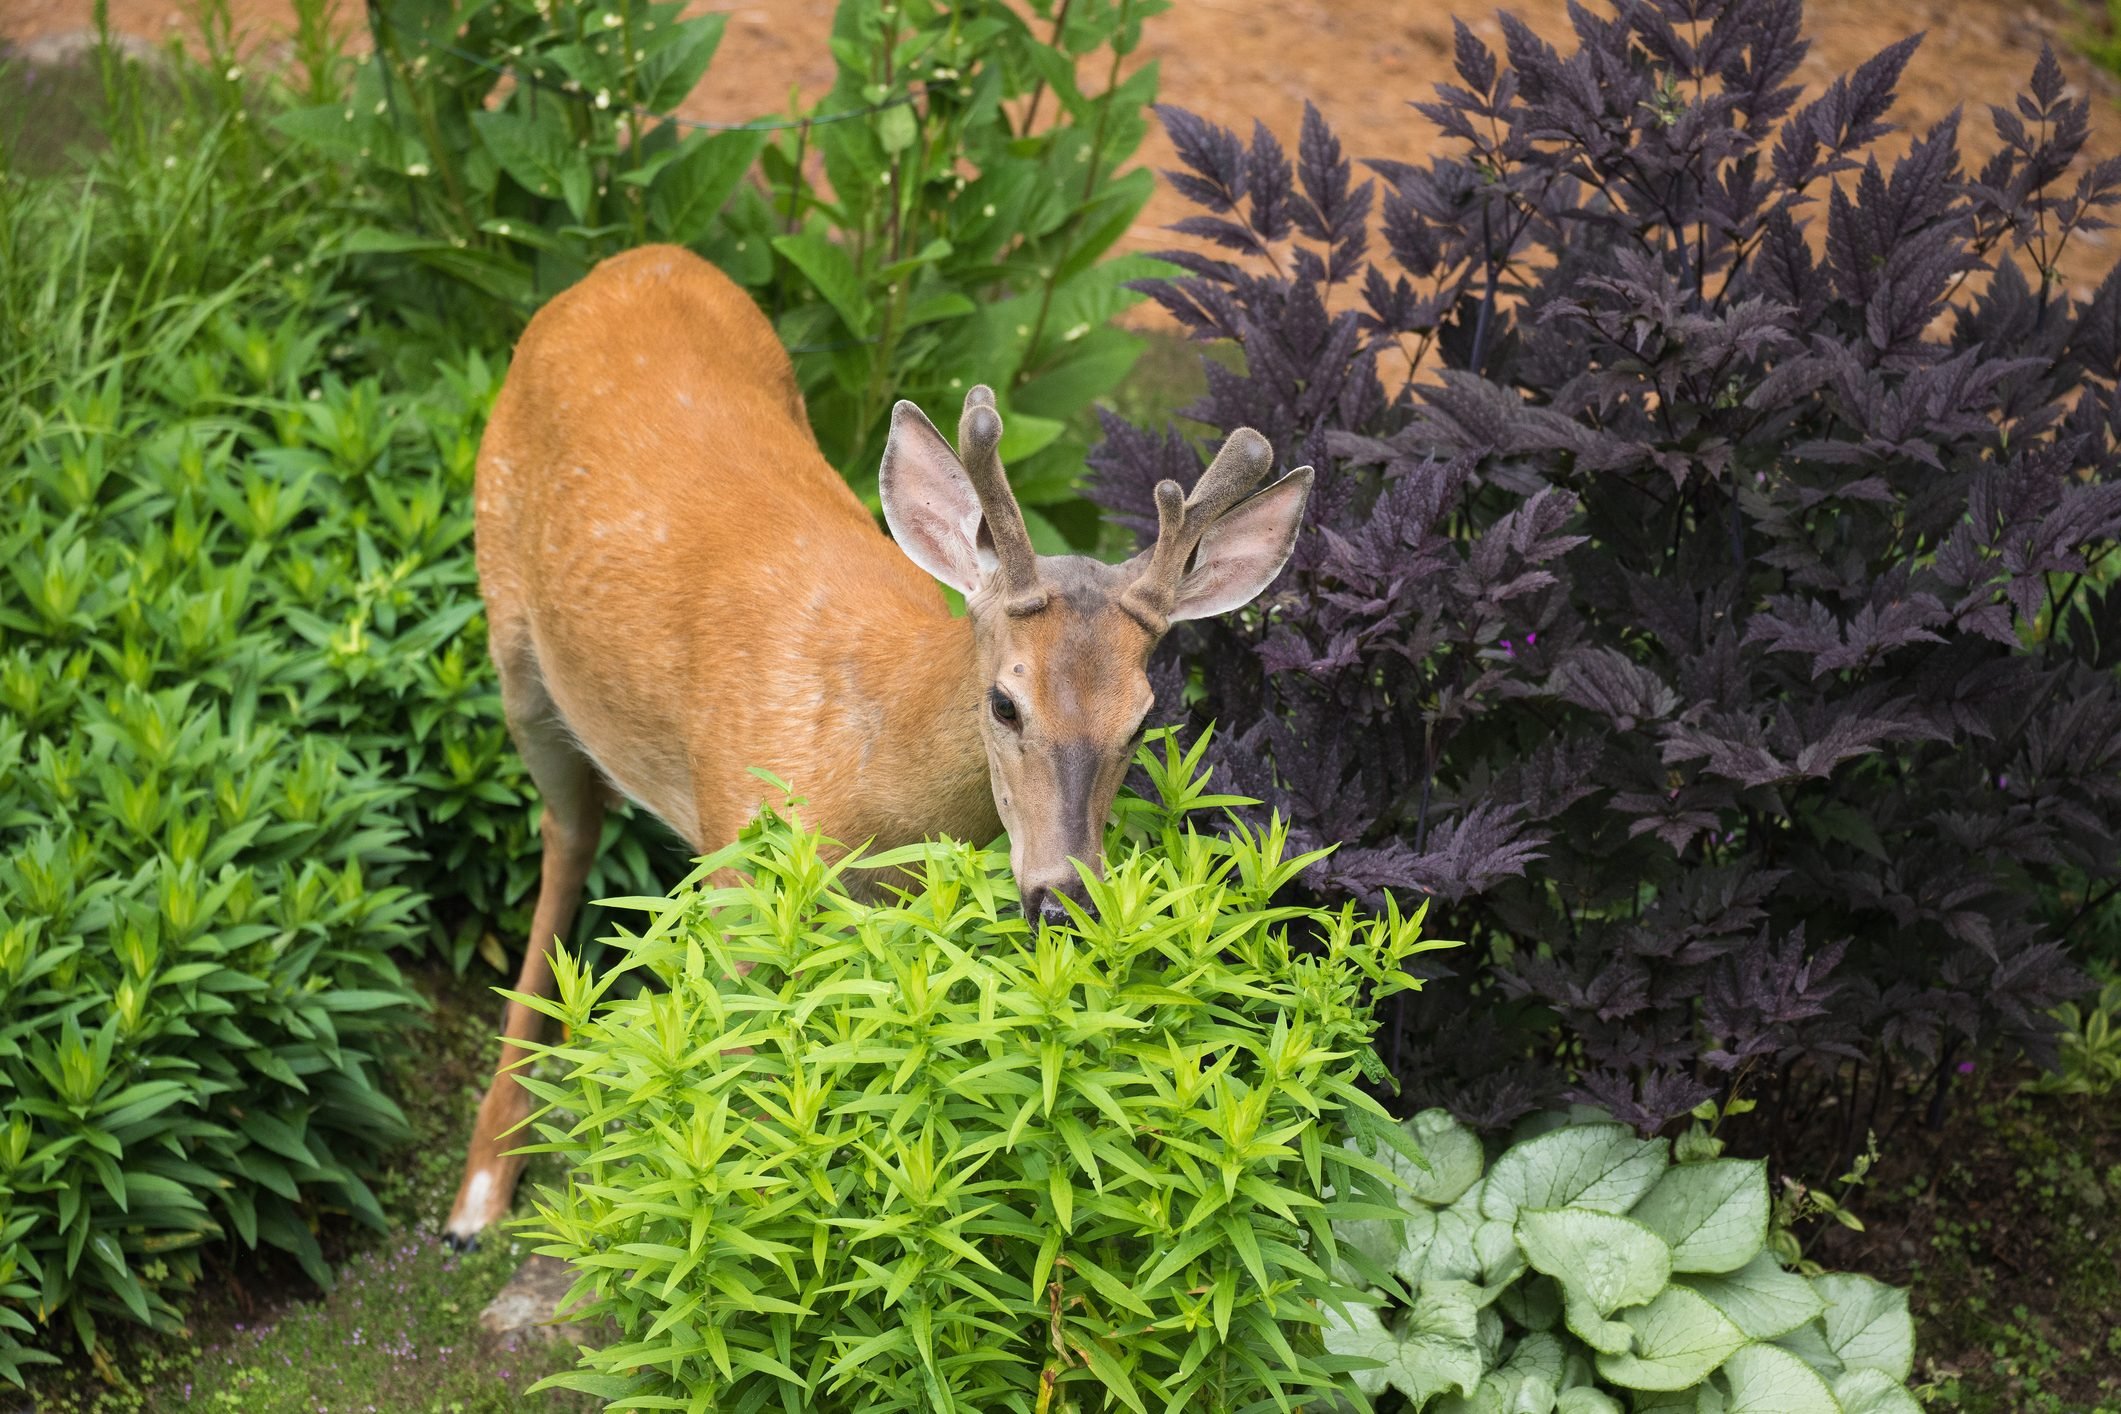 How To Safely Deter Animals That Steal From Your Garden